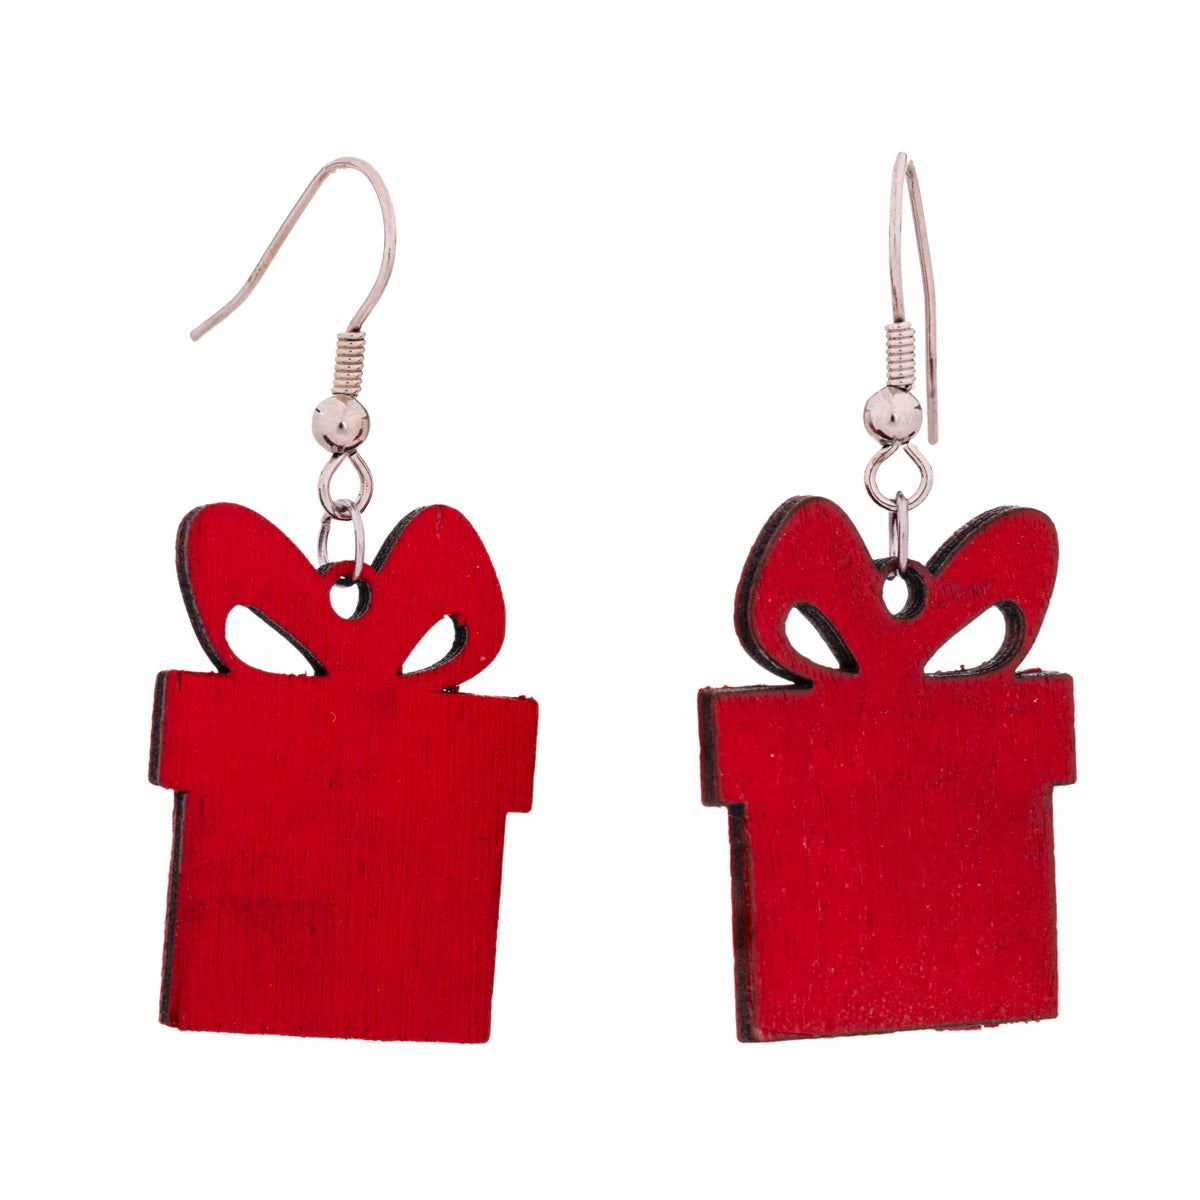 Wooden Christmas gift earrings - Made in Finland (Steel 316L)